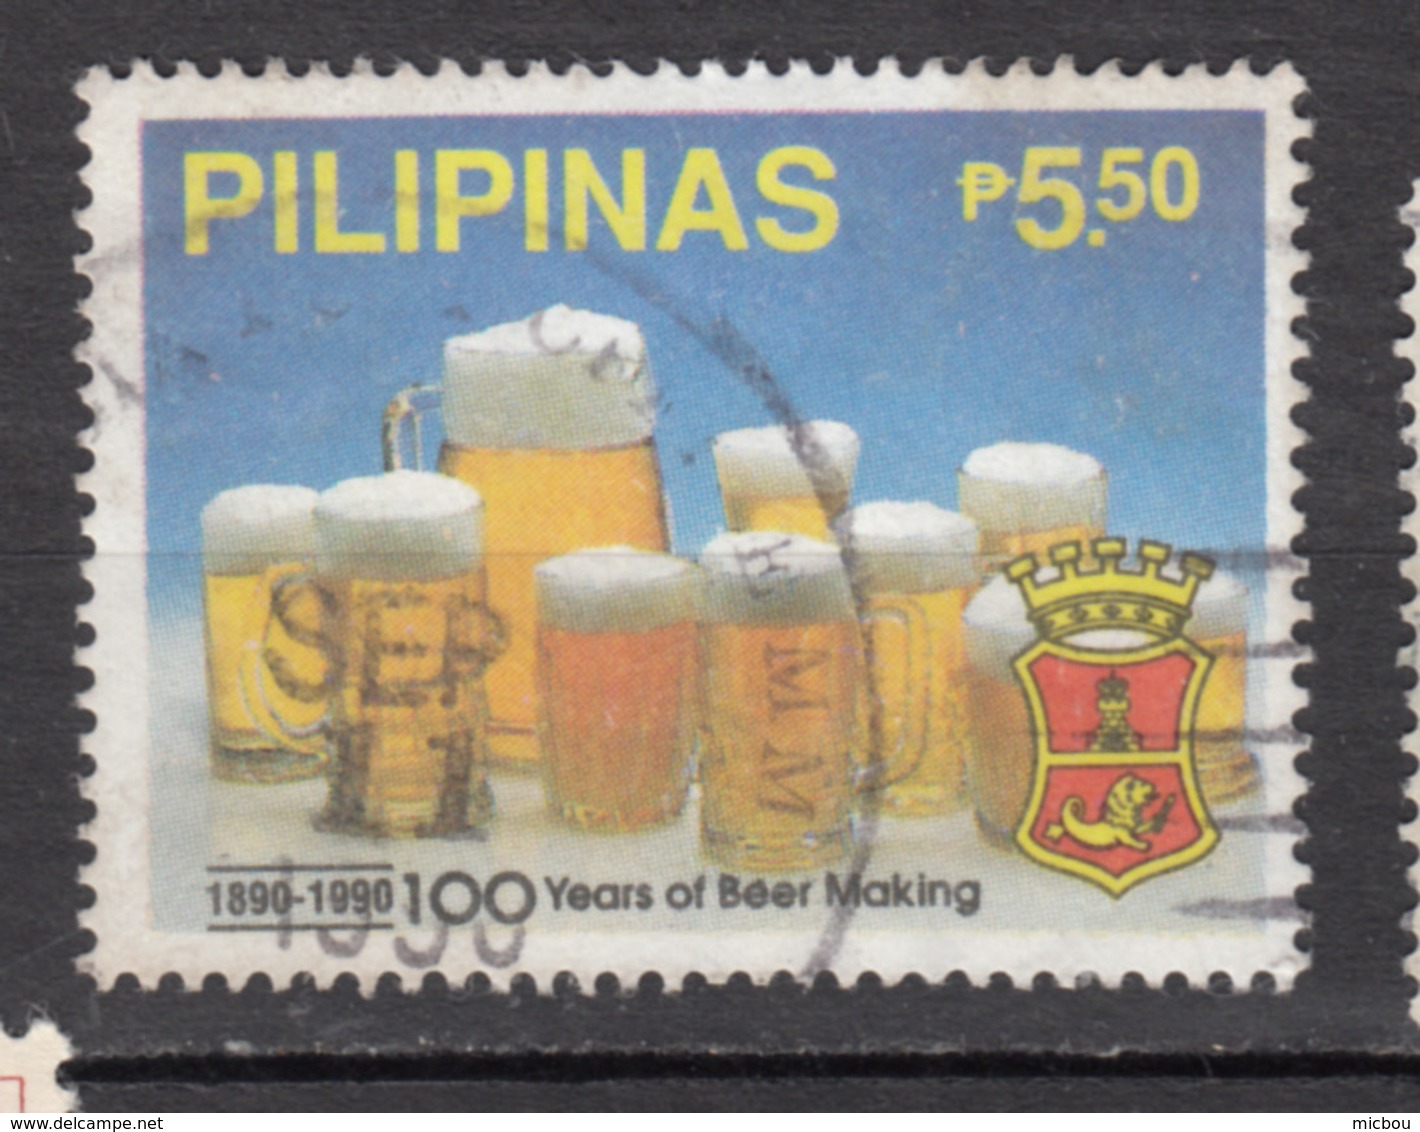 Philippines, Pilipinas, Bière, Beer, Alcohol, Alcool, Sirene, Mermaid, Verre, Glass - Biere